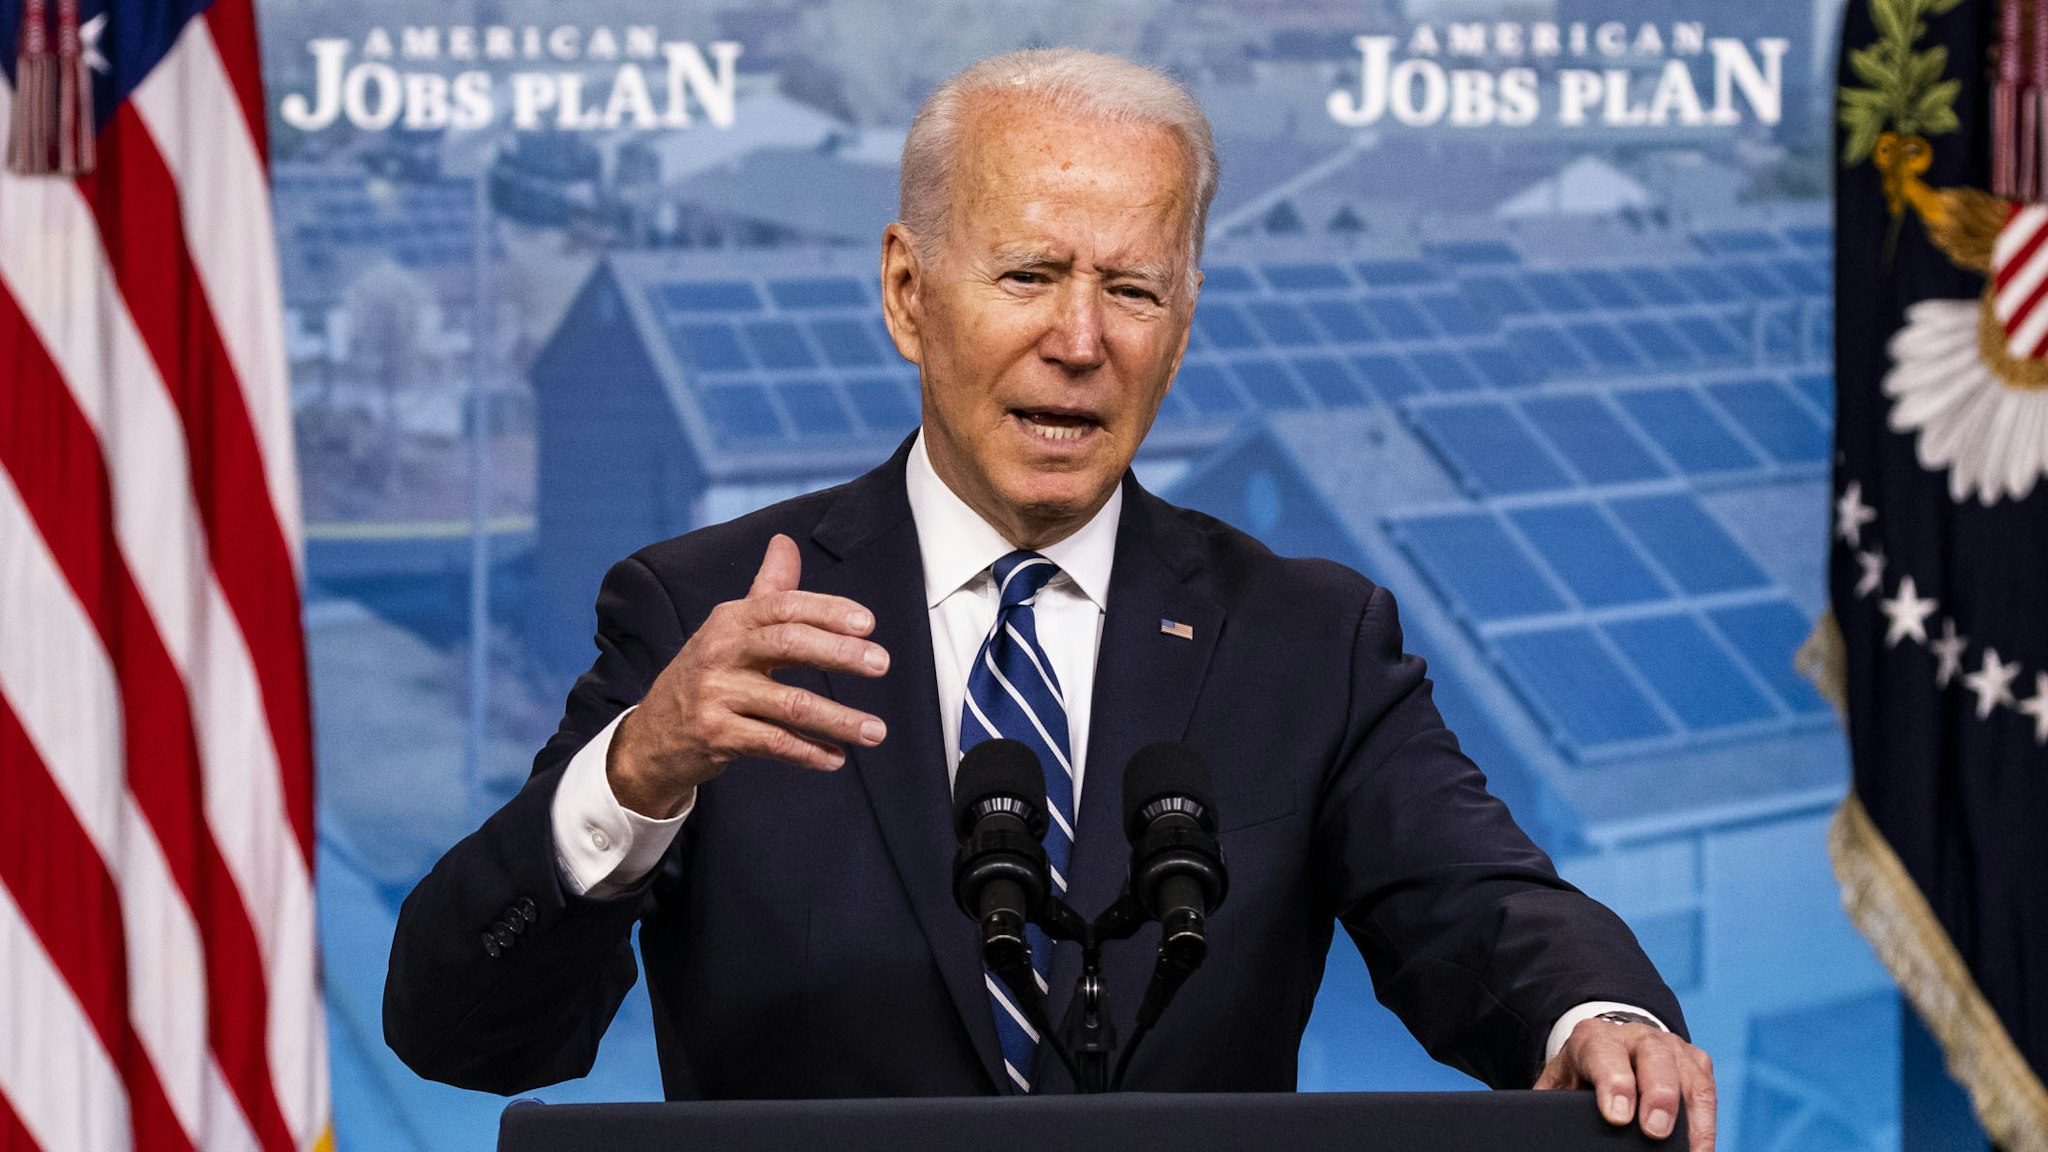 U.S. President Joe Biden speaks in the Eisenhower Executive Office Building in Washington, D.C., U.S., on Friday, July 2, 2021. U.S. job growth accelerated in June, suggesting firms are having greater success recruiting workers to keep pace with the broadening of economic activity.